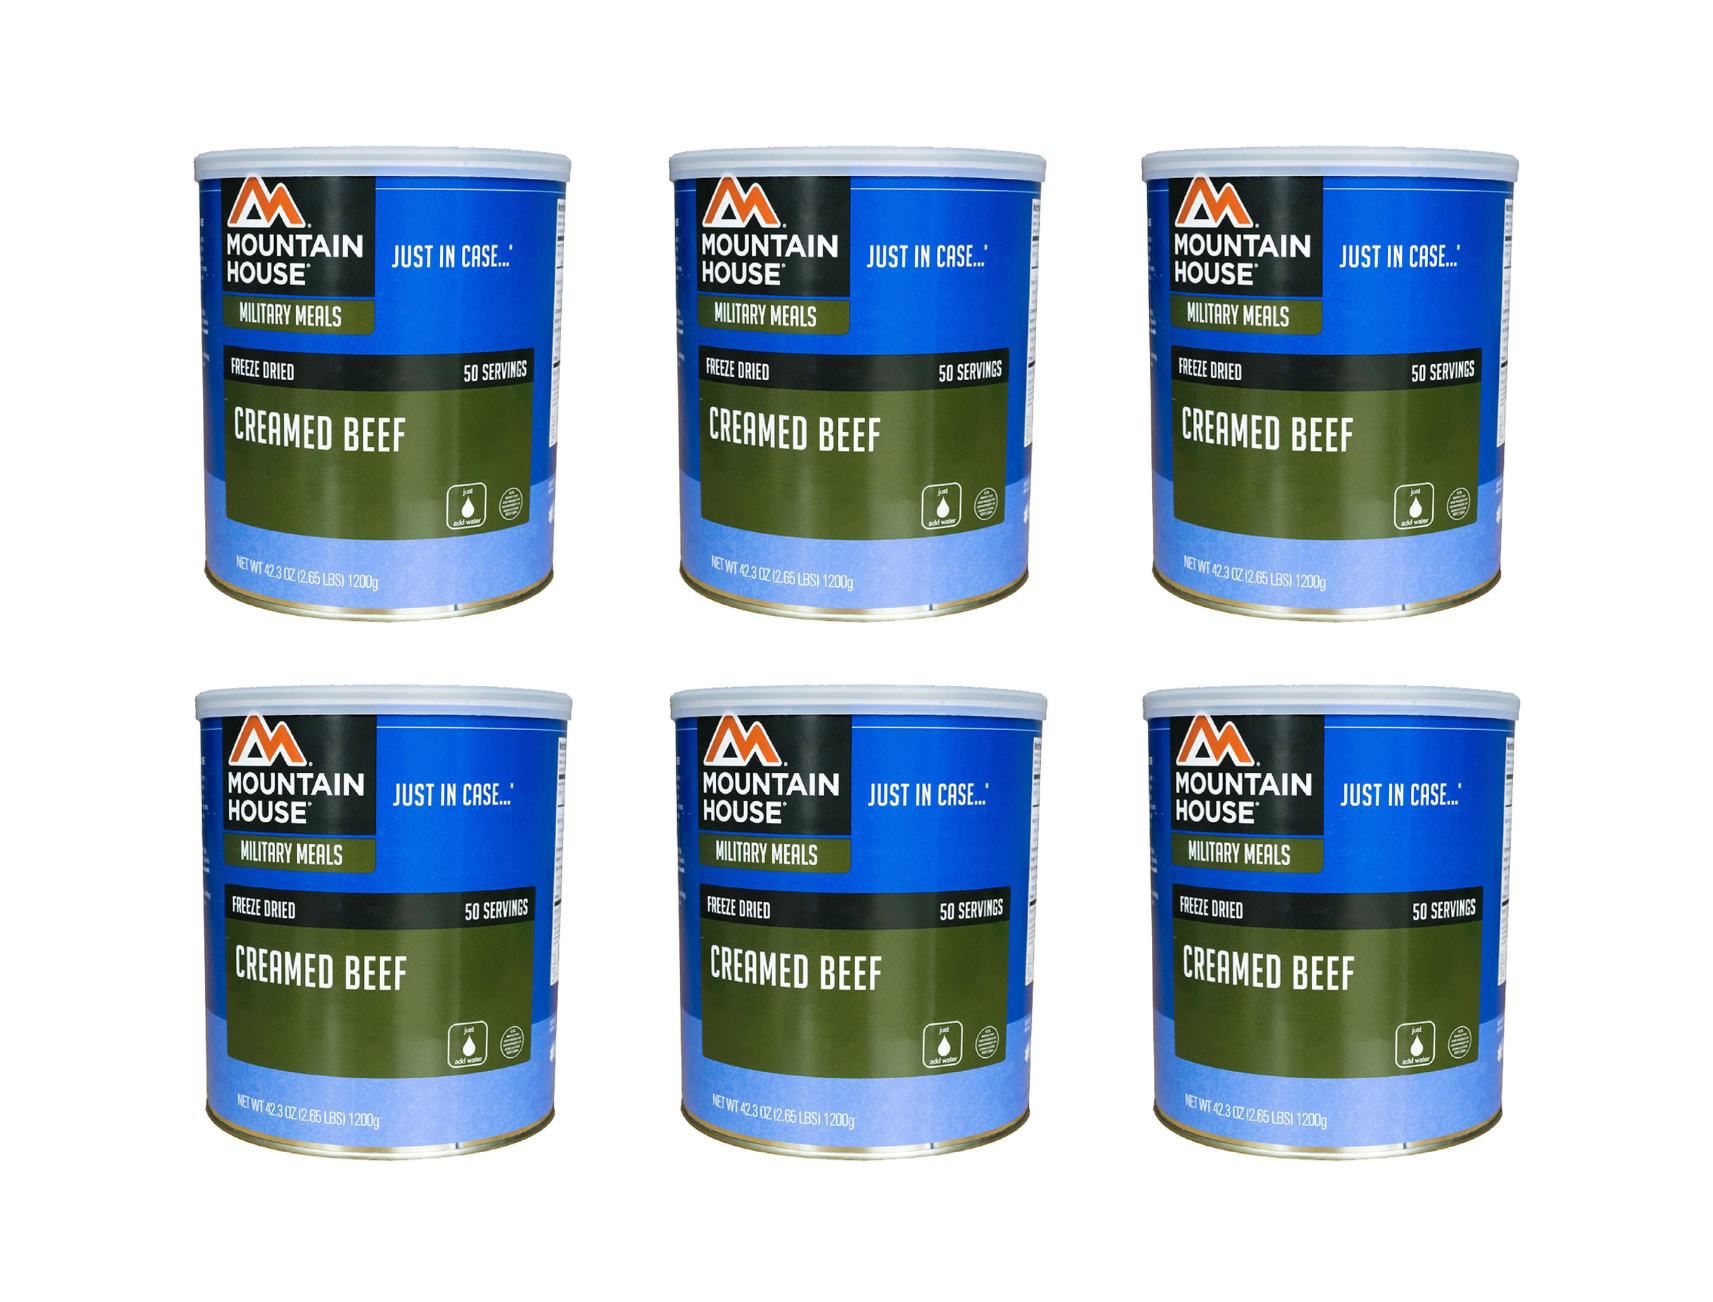 Image of Mountain house Military Creamed Beef #10 Can- 6 cans